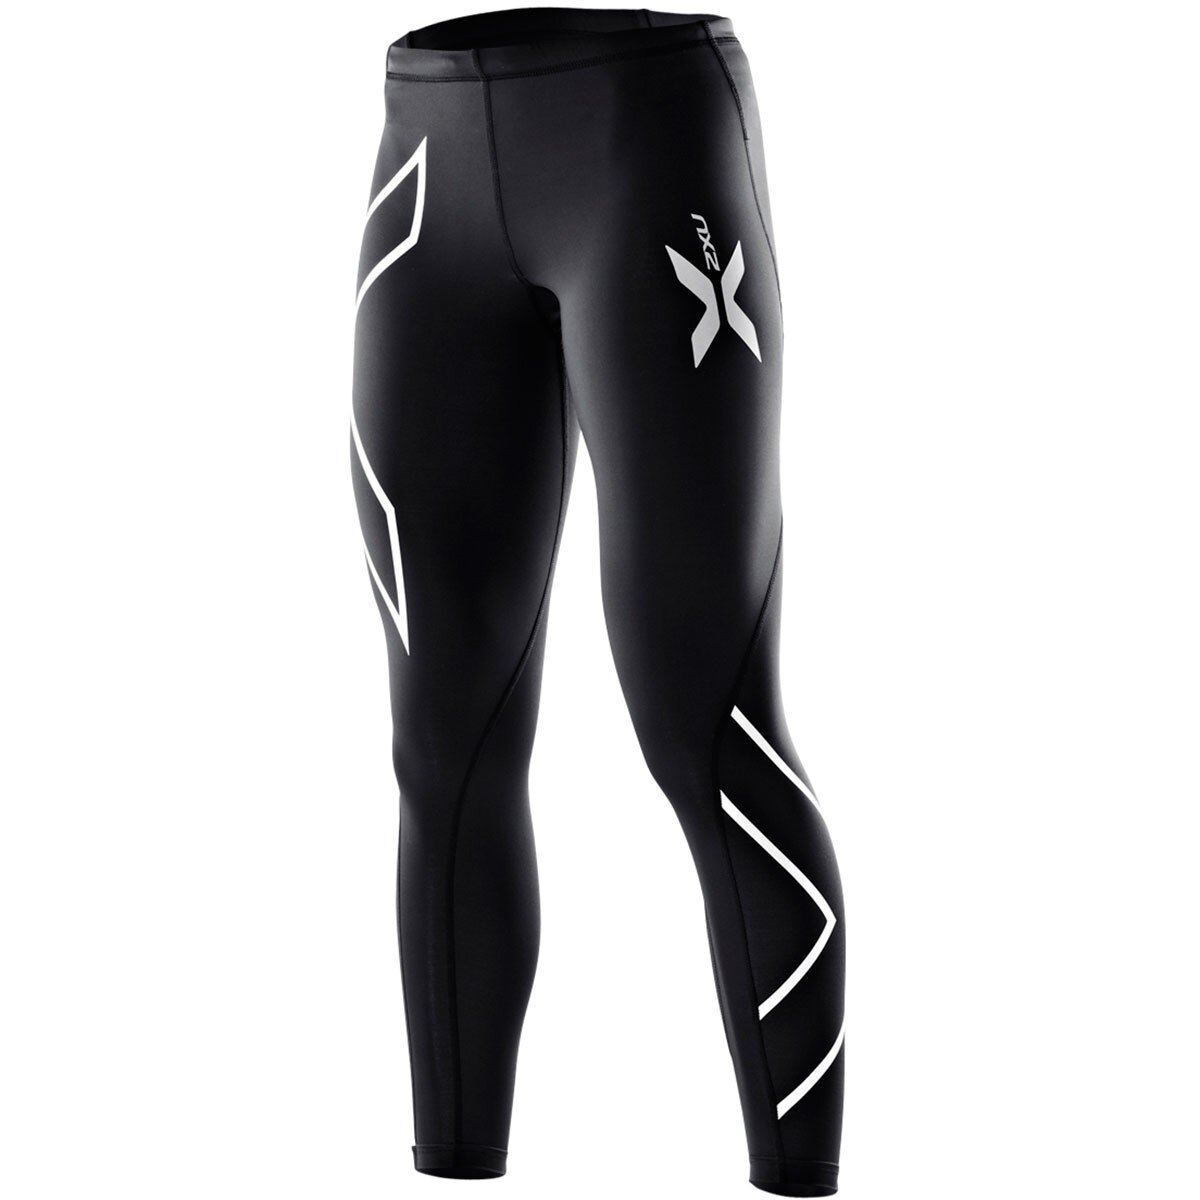 2XU Compression Women's Long Tights - Buy Ph: 1800-370-766 - AfterPay & ZipPay Available!